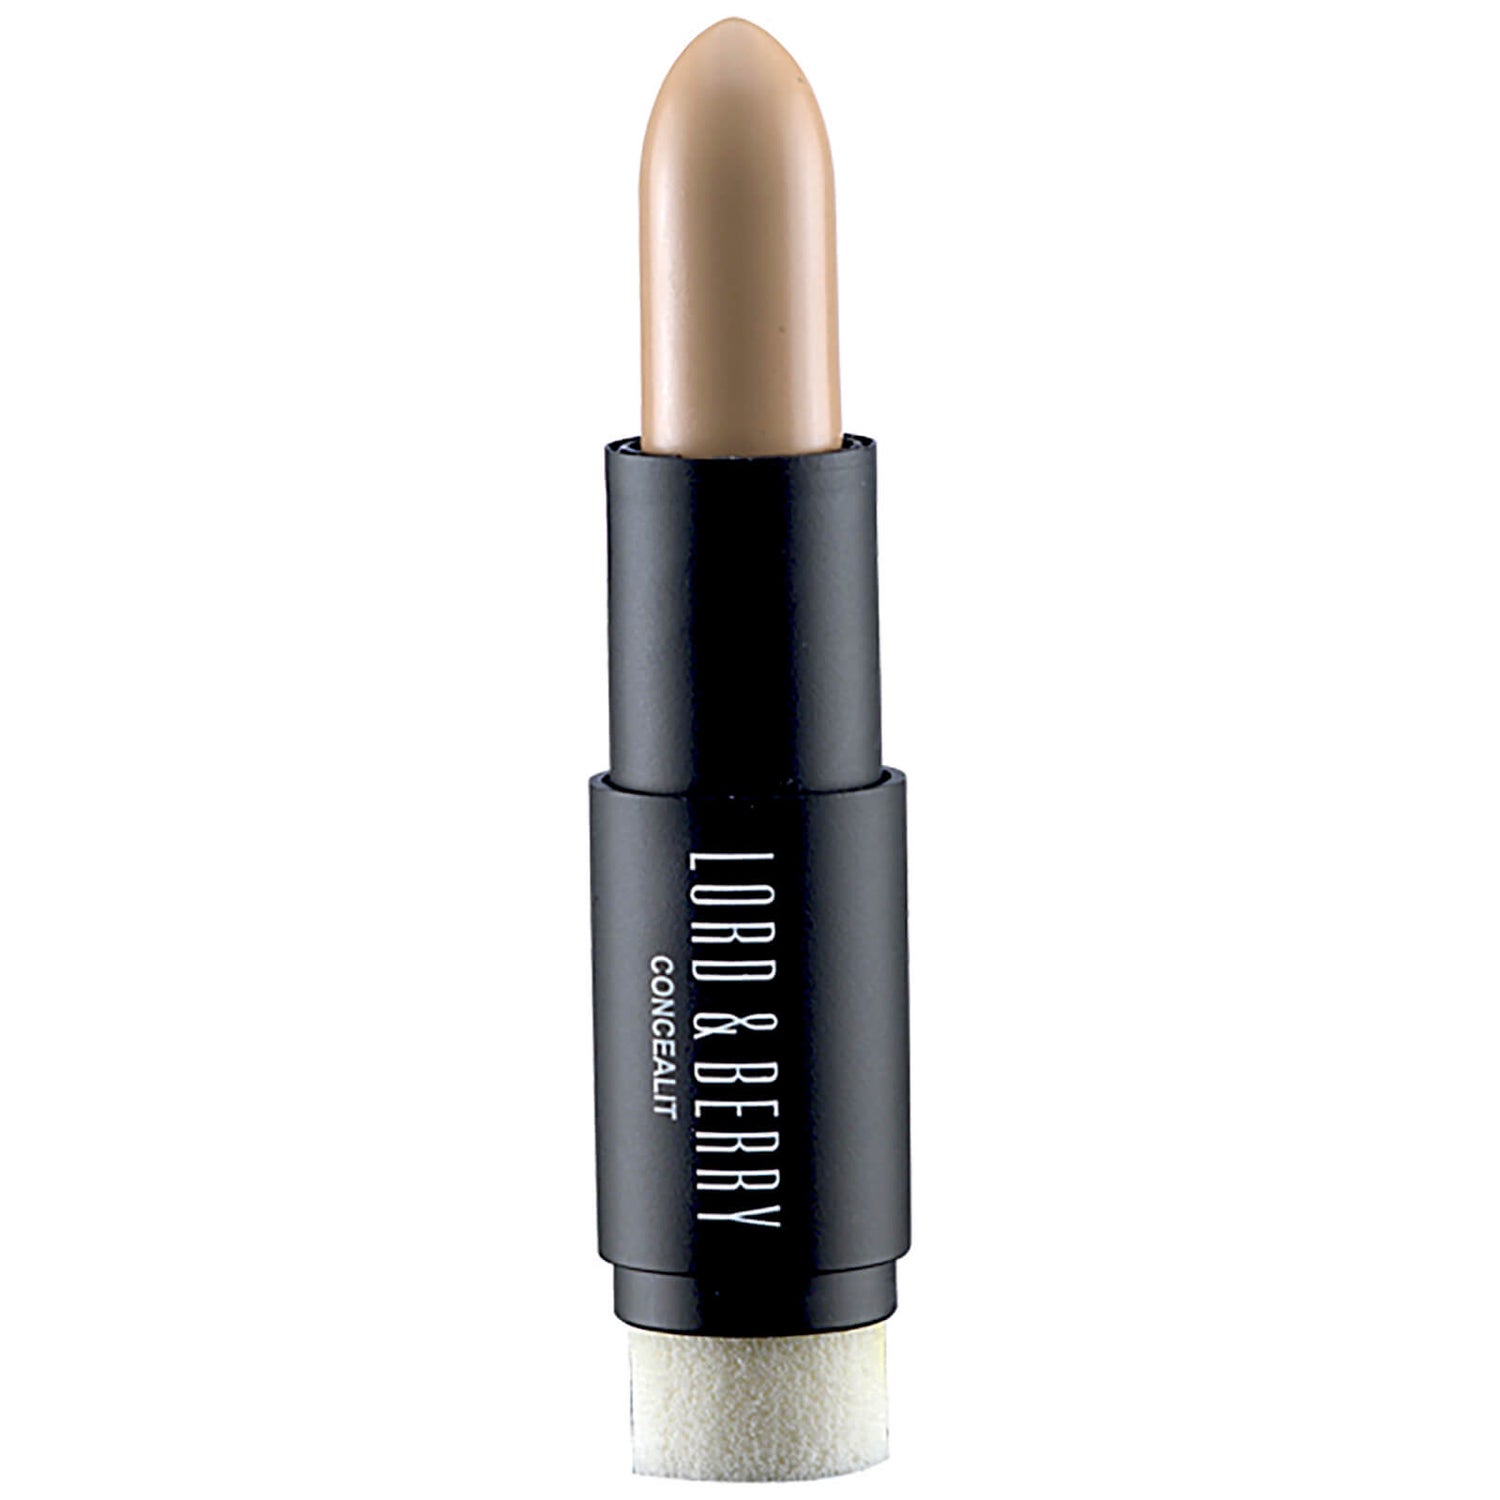 Lord & Berry Conceal-It Stick (Various Shades) - Ivory